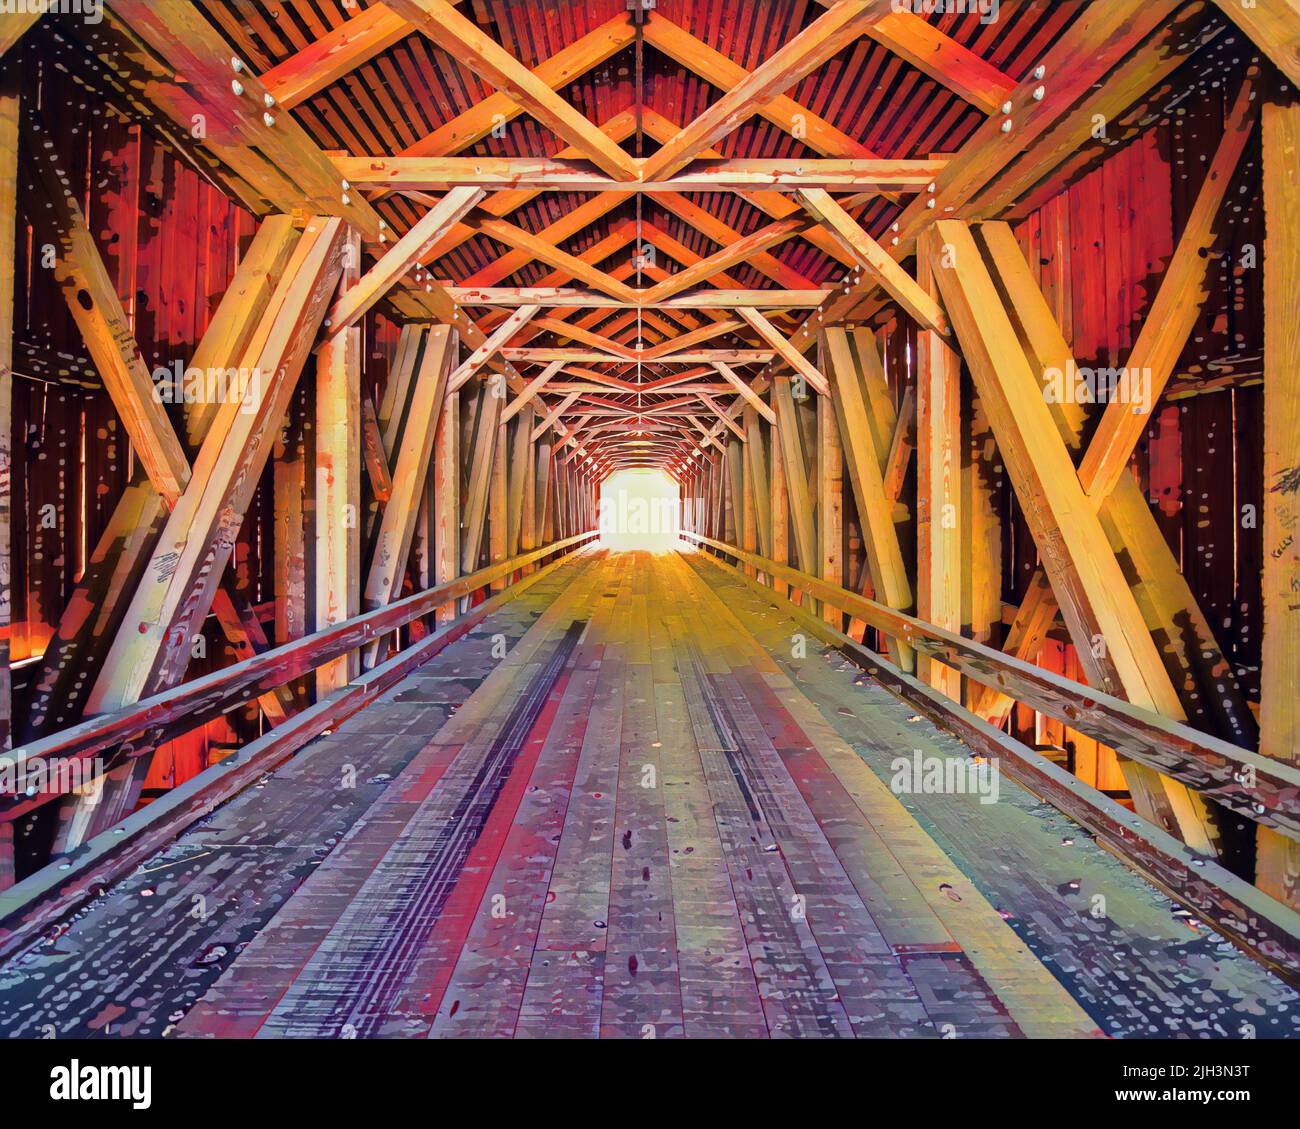 Painted image inside Lowe's Covered Bridge in Maine, with light at the end. Stock Photo